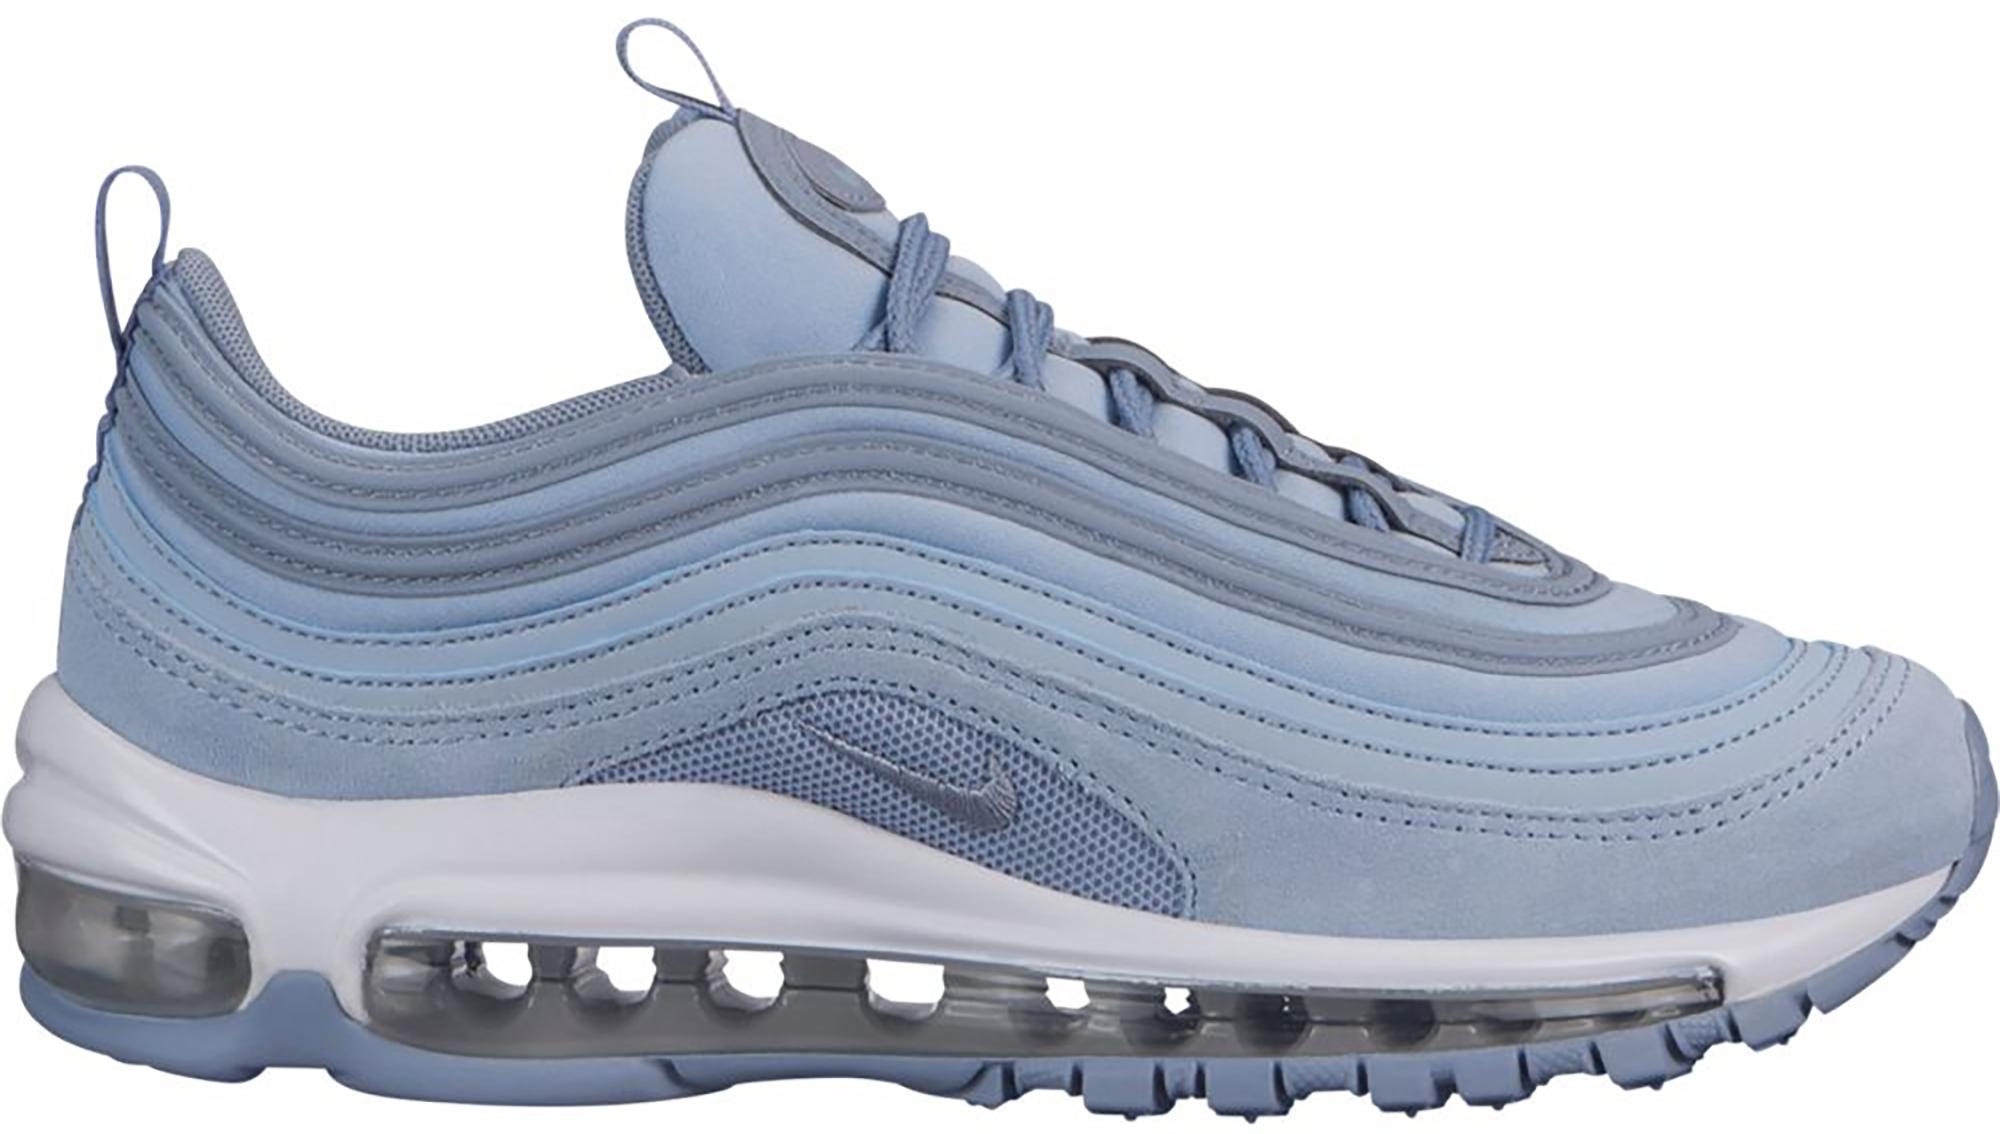 baby blue and white air max 97